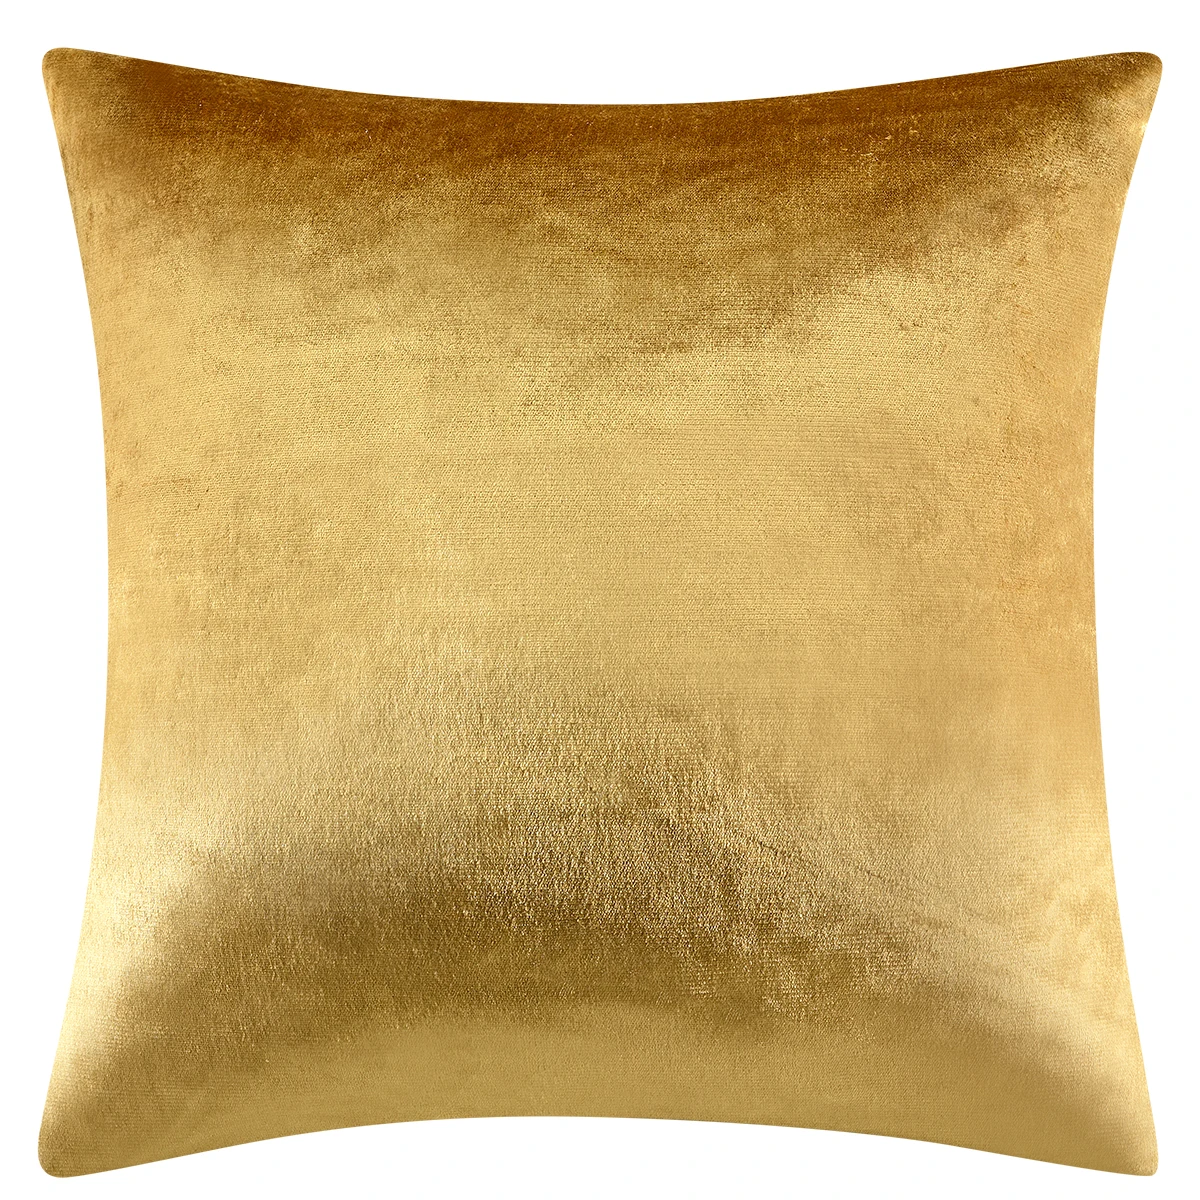 Luxury Decorative Gold Cushion Covers for Sofa Couch Bed Living Room Solid Velvet Throw Pillow Covers Square Lumbar Pillowcase